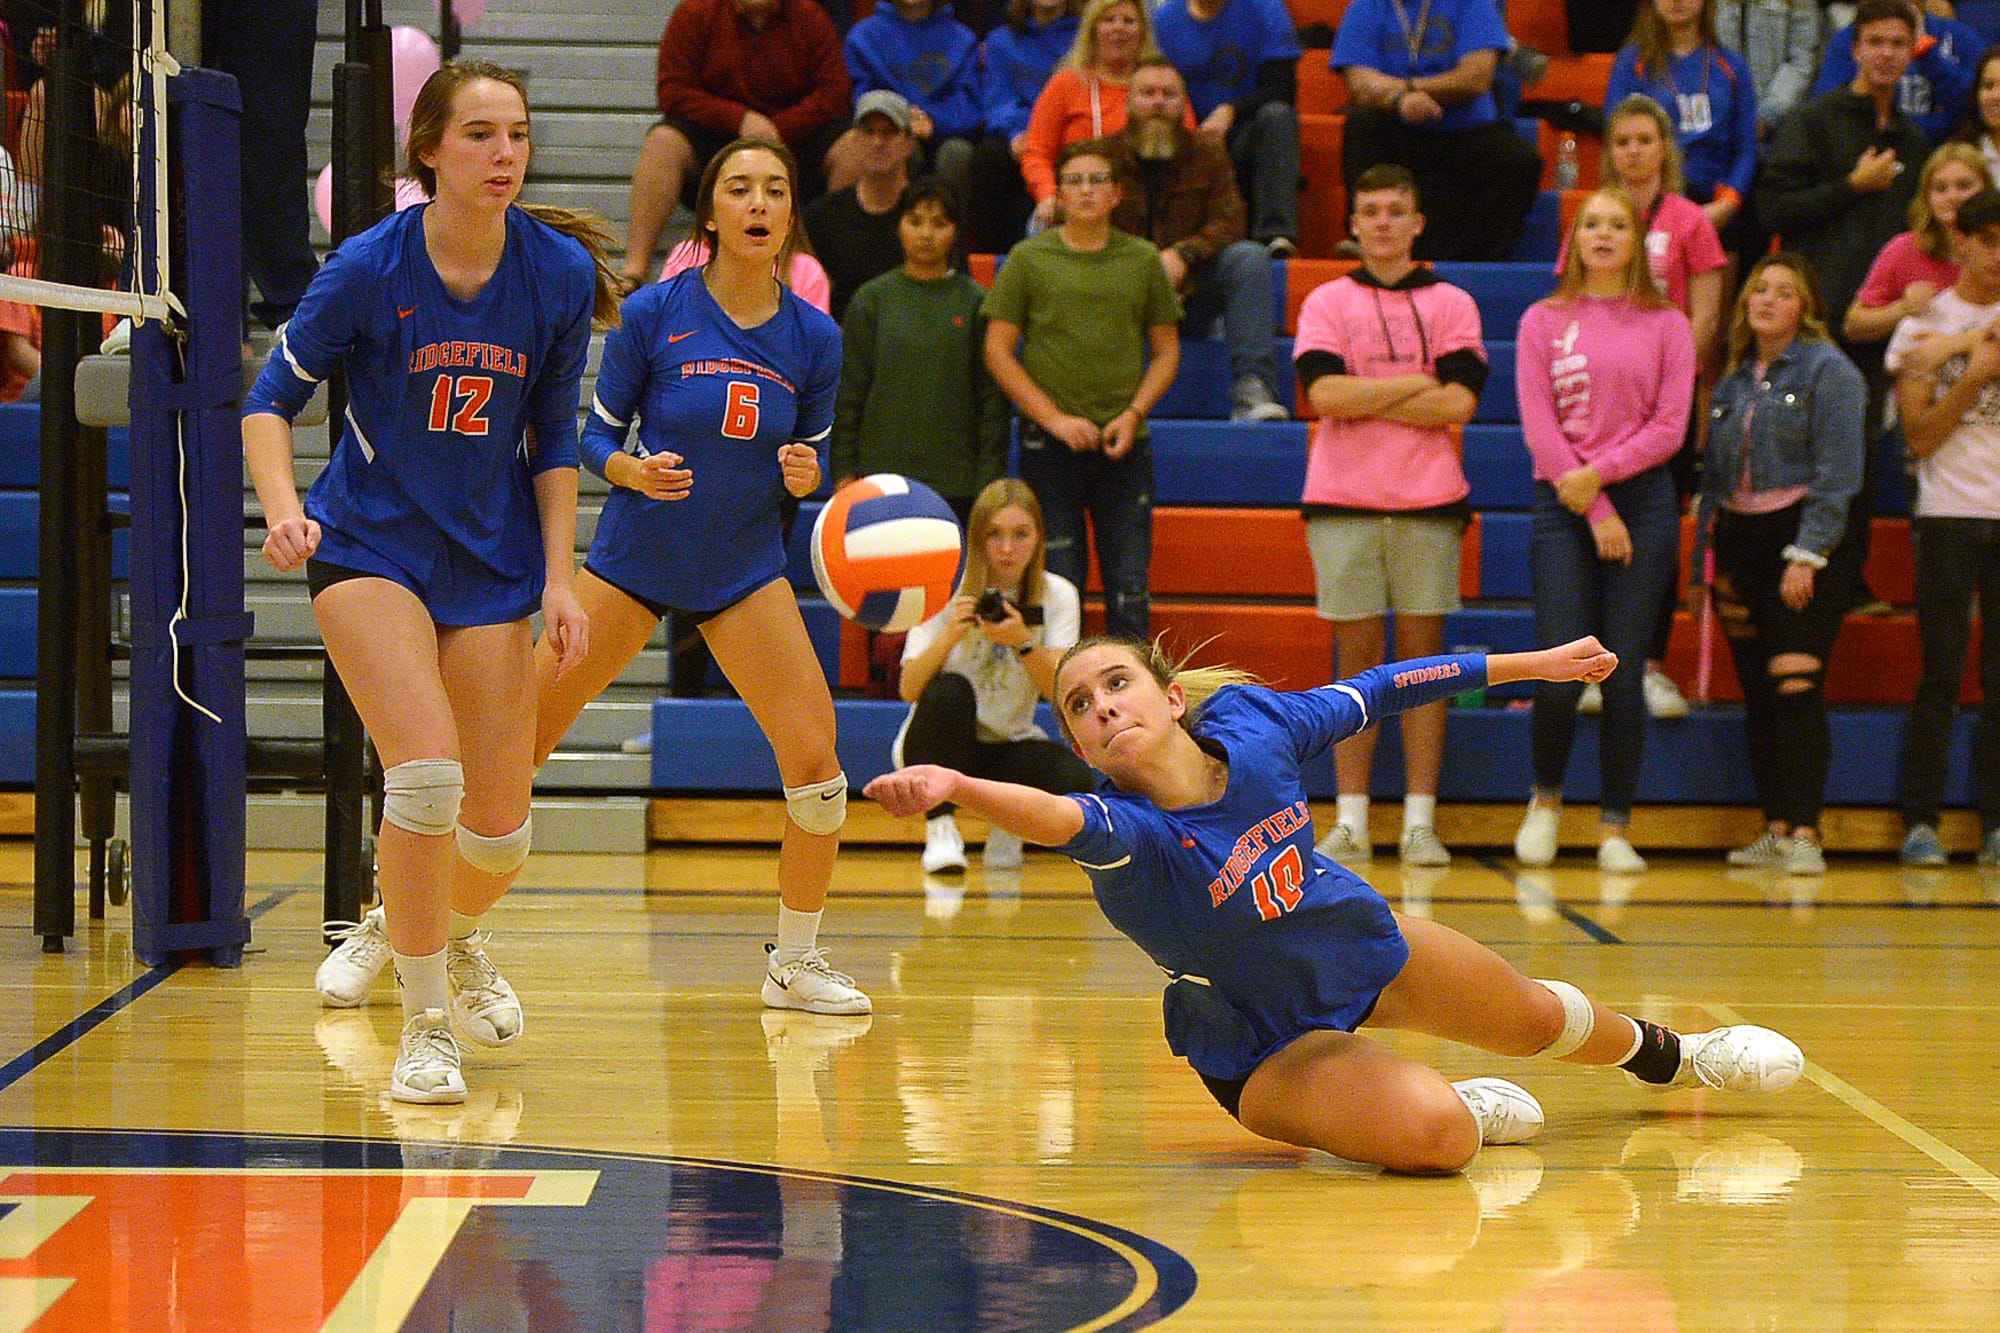 Ridgefield sophomore Morgan Harter is barely able to keep the ball of the floor during a game against Columbia River at Ridgefield High School on Tuesday, October 8, 2019. Ridgefield won all three sets against Columbia River.